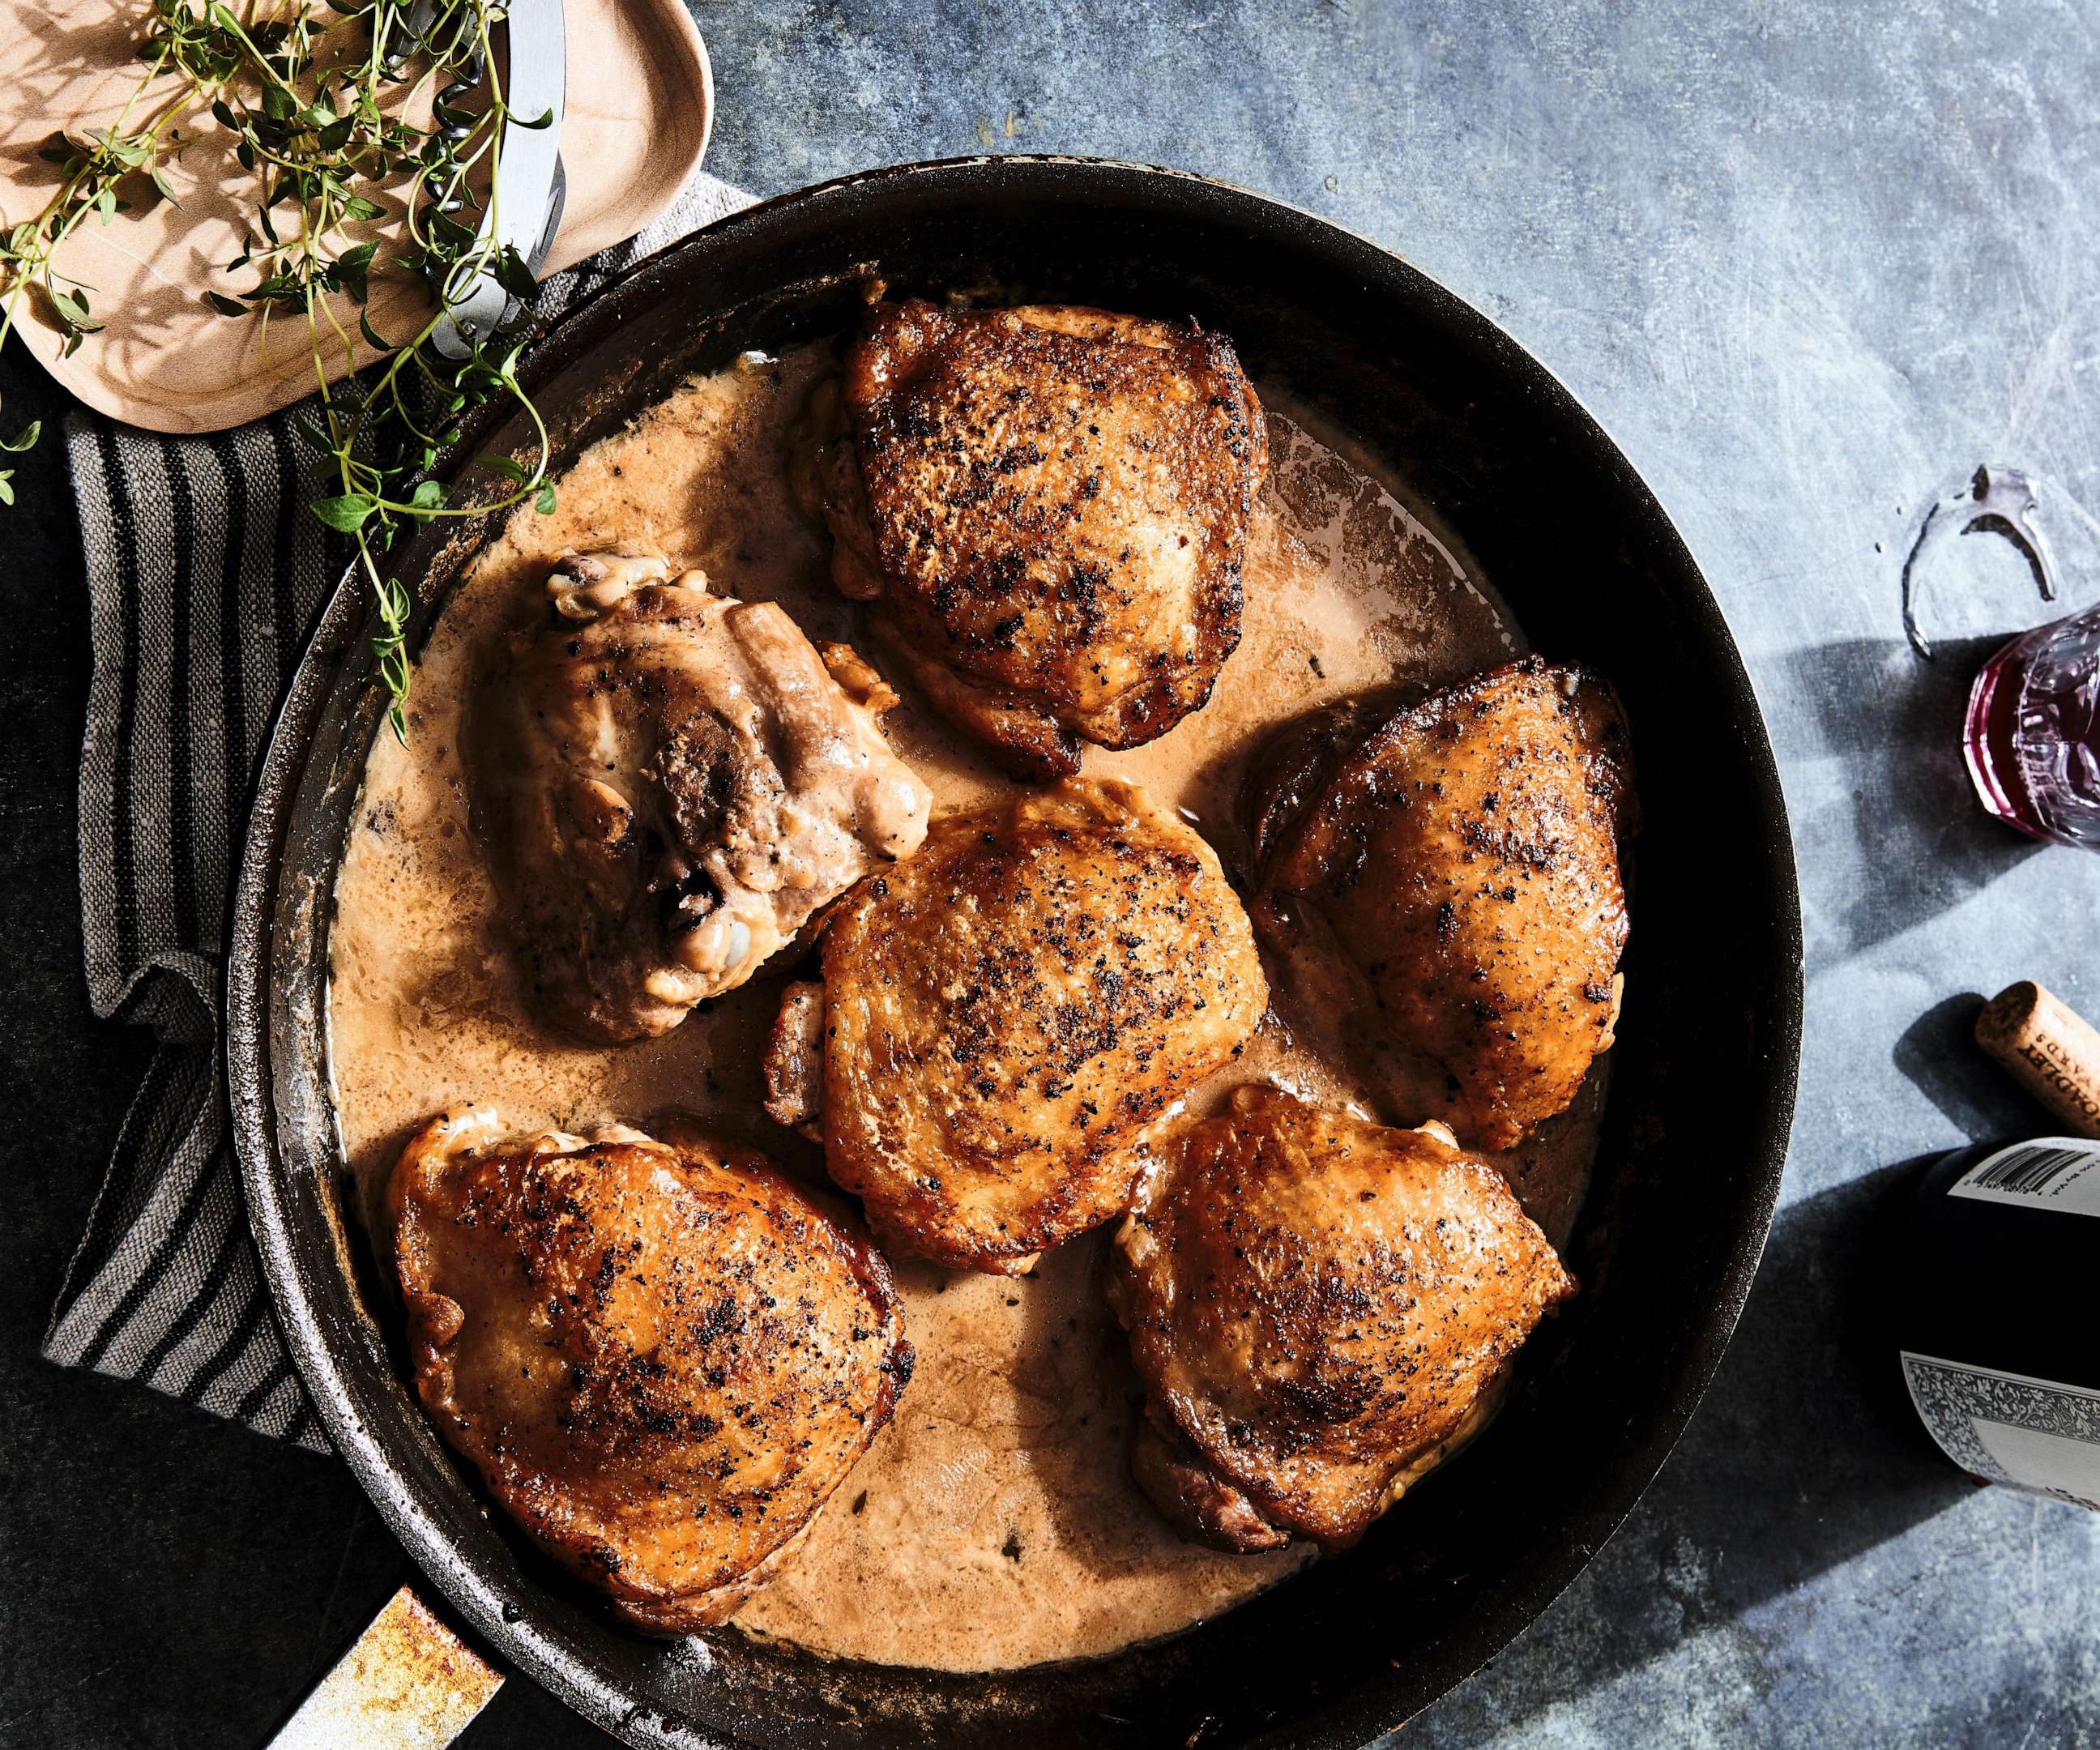 PHOTO: A cast iron skillet of roasted chicken thighs.